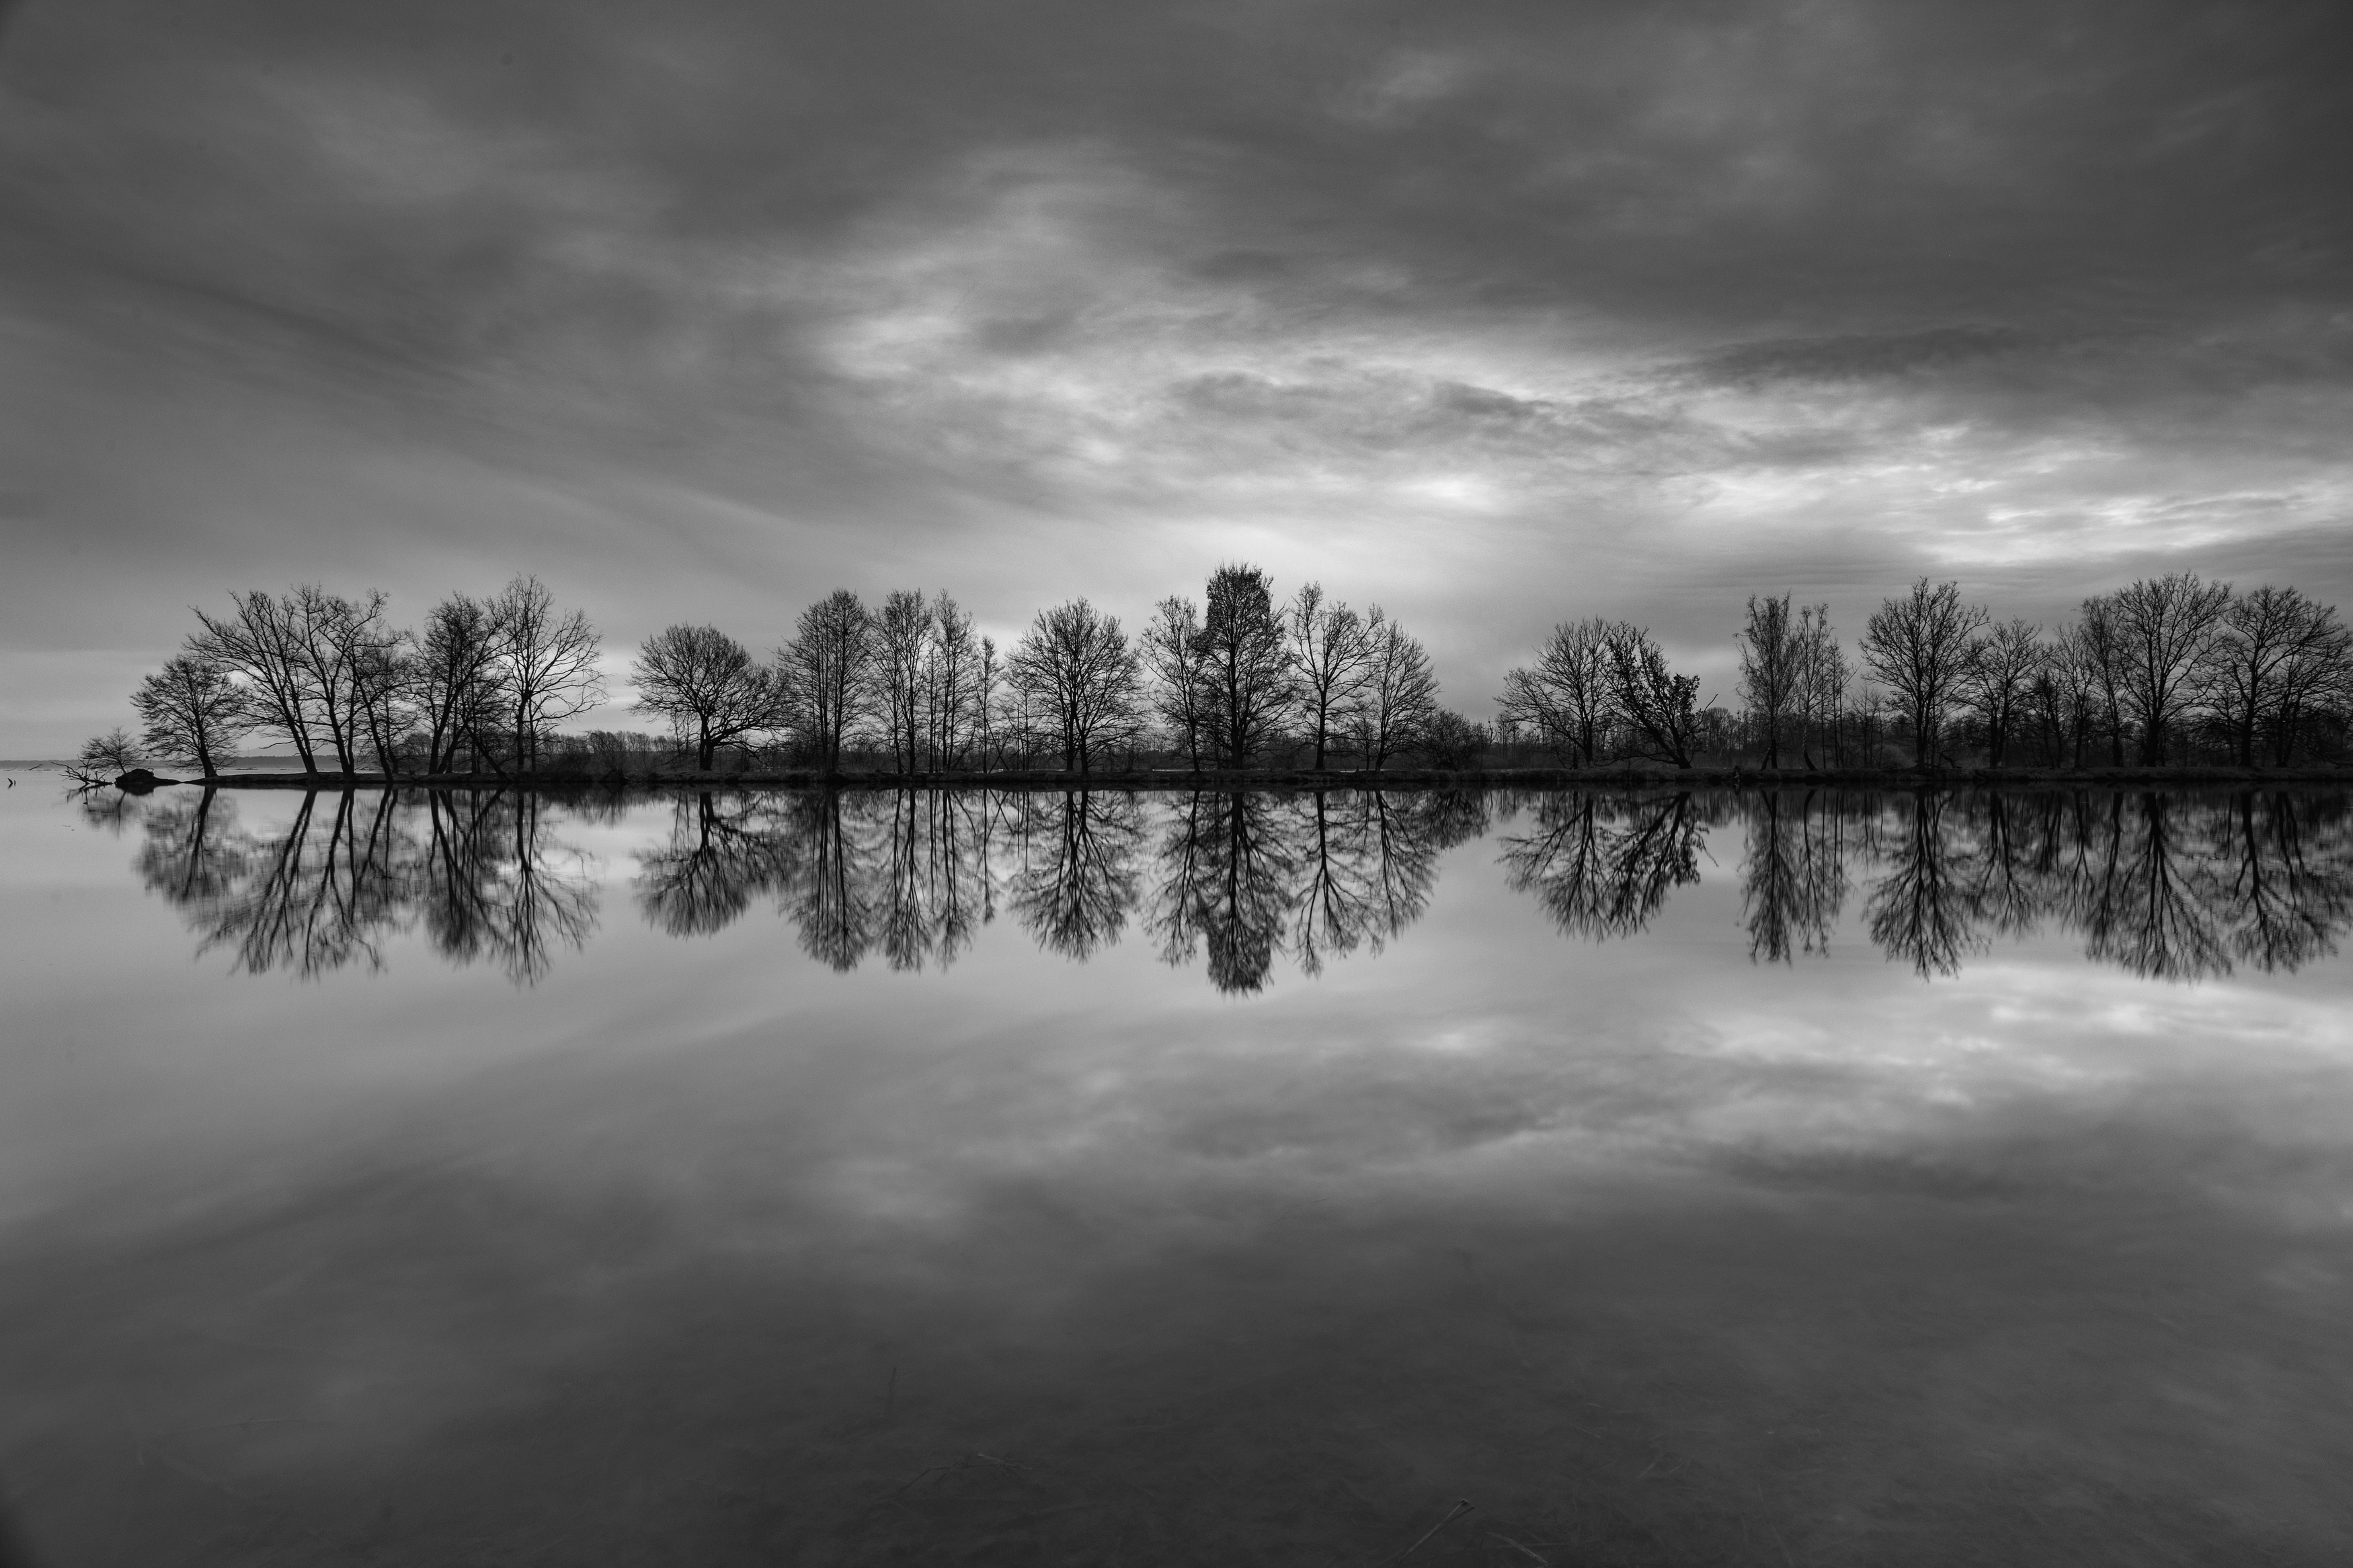 Horizontal, Photography, Reflection, Tree, Sky, Clouds, Water, Lake, Nature, Tranquility, Day, Monochrome, Symetry, Black&White, Landscape, Damian Cyfka